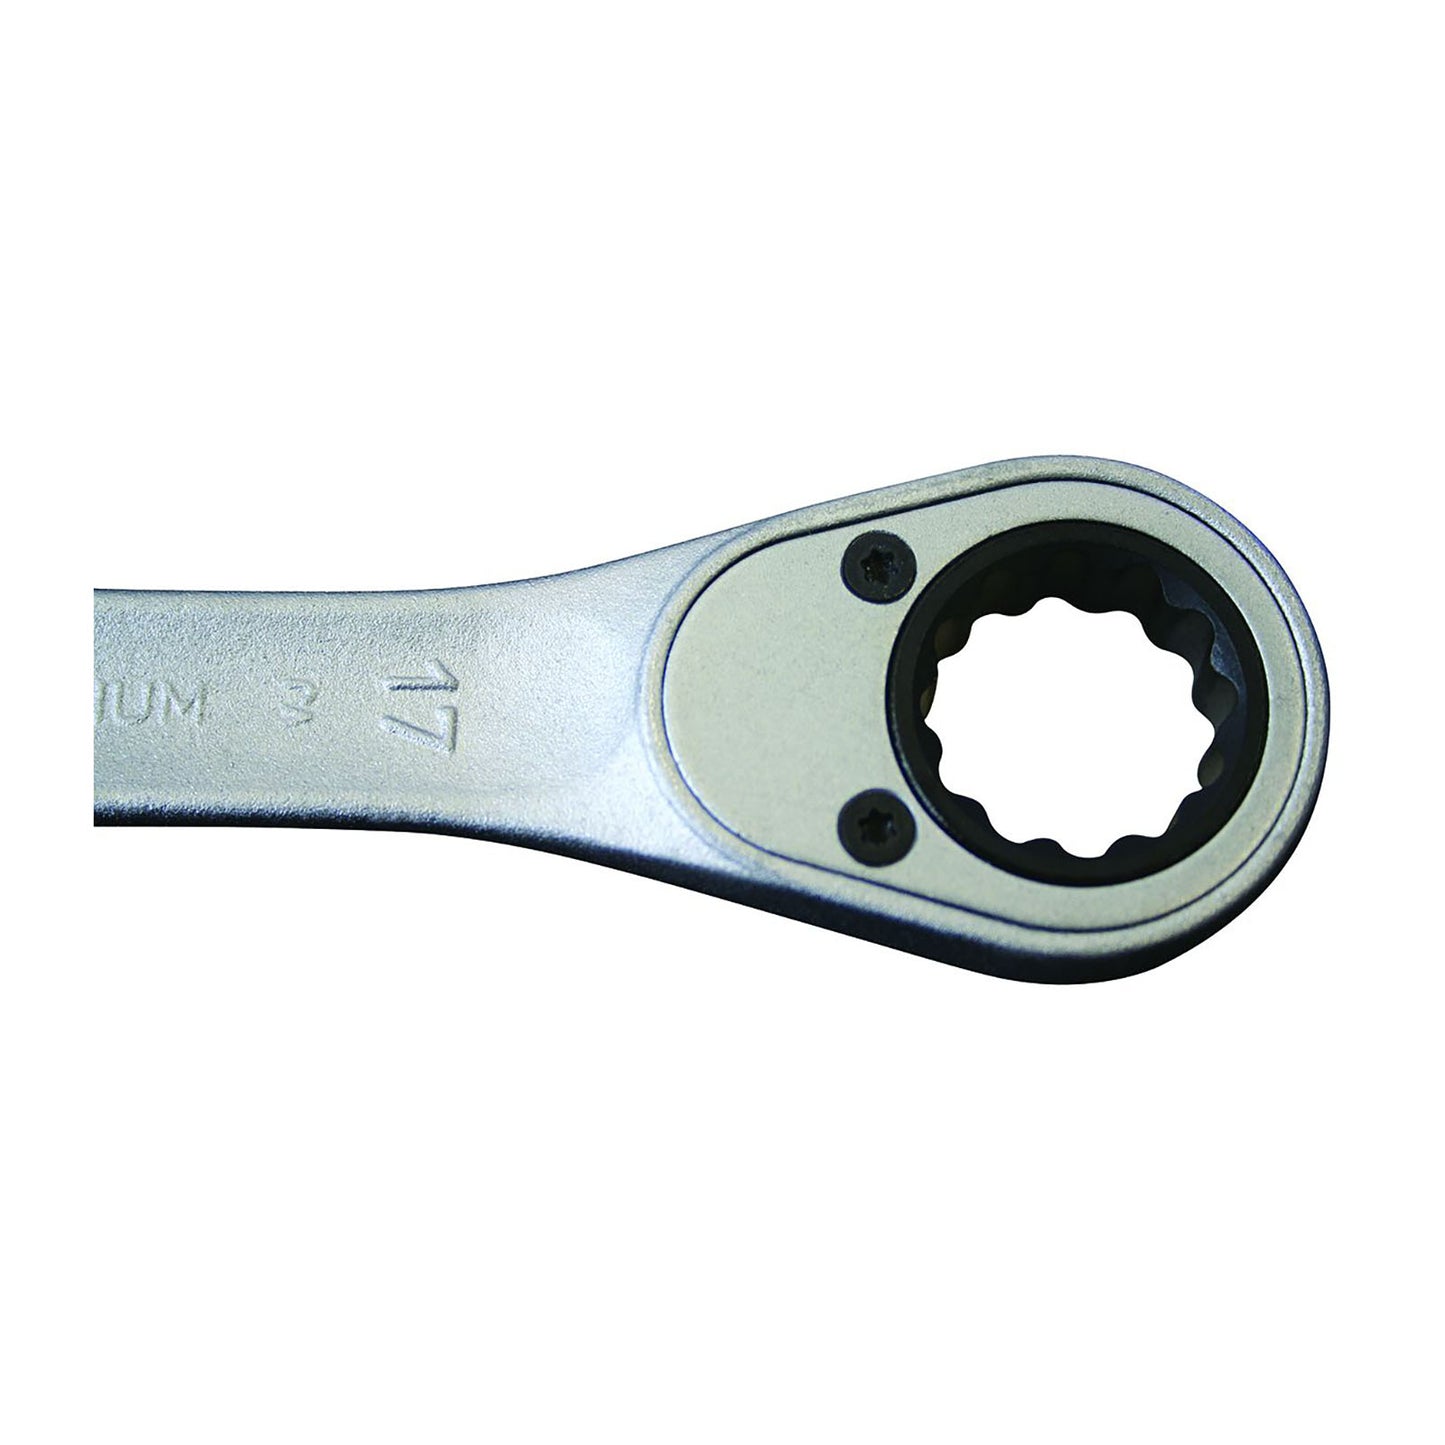 GEDORE 7 R 30 - Ratchet combination wrench, 30mm (2297221)